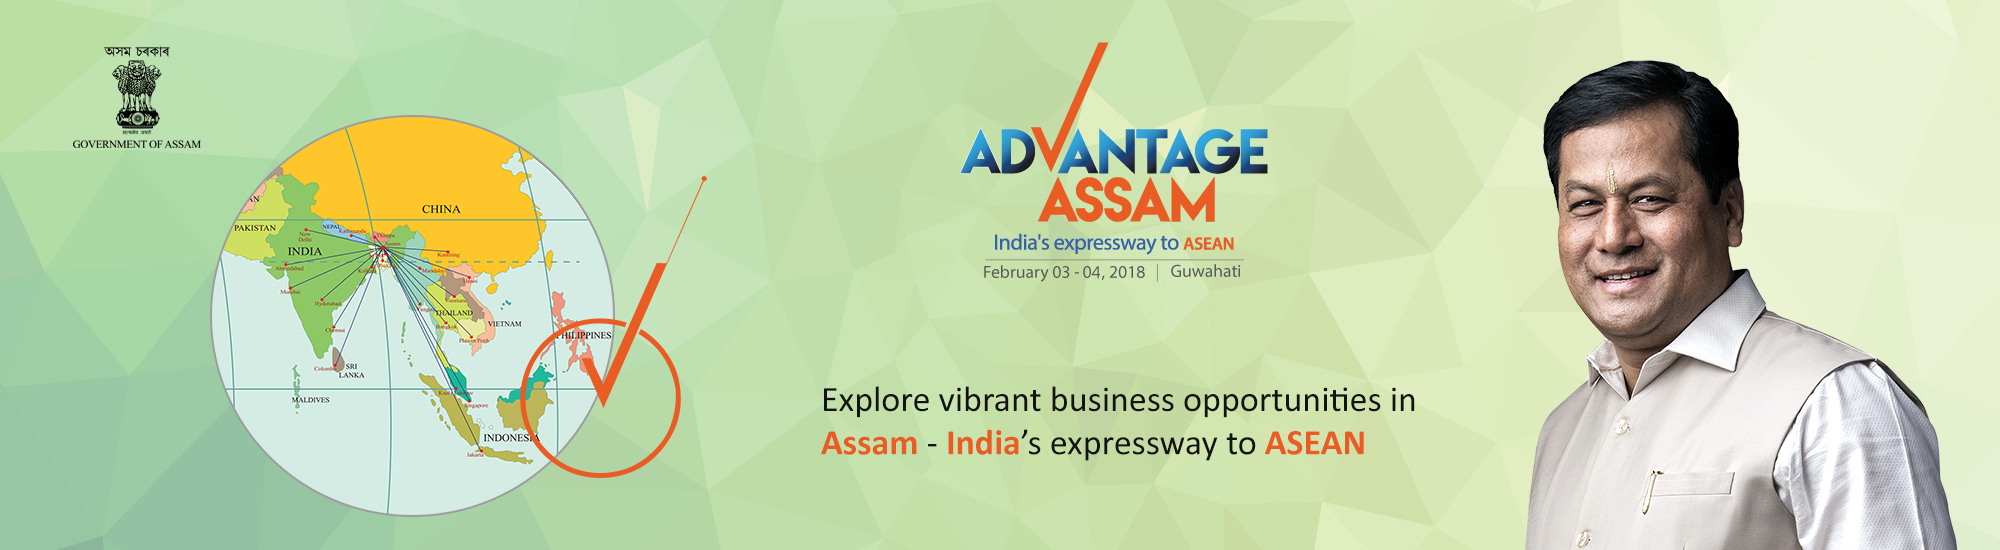 Advantage Assam - Explore vibrant business opportunities in Assam, India's expressway to ASEAN